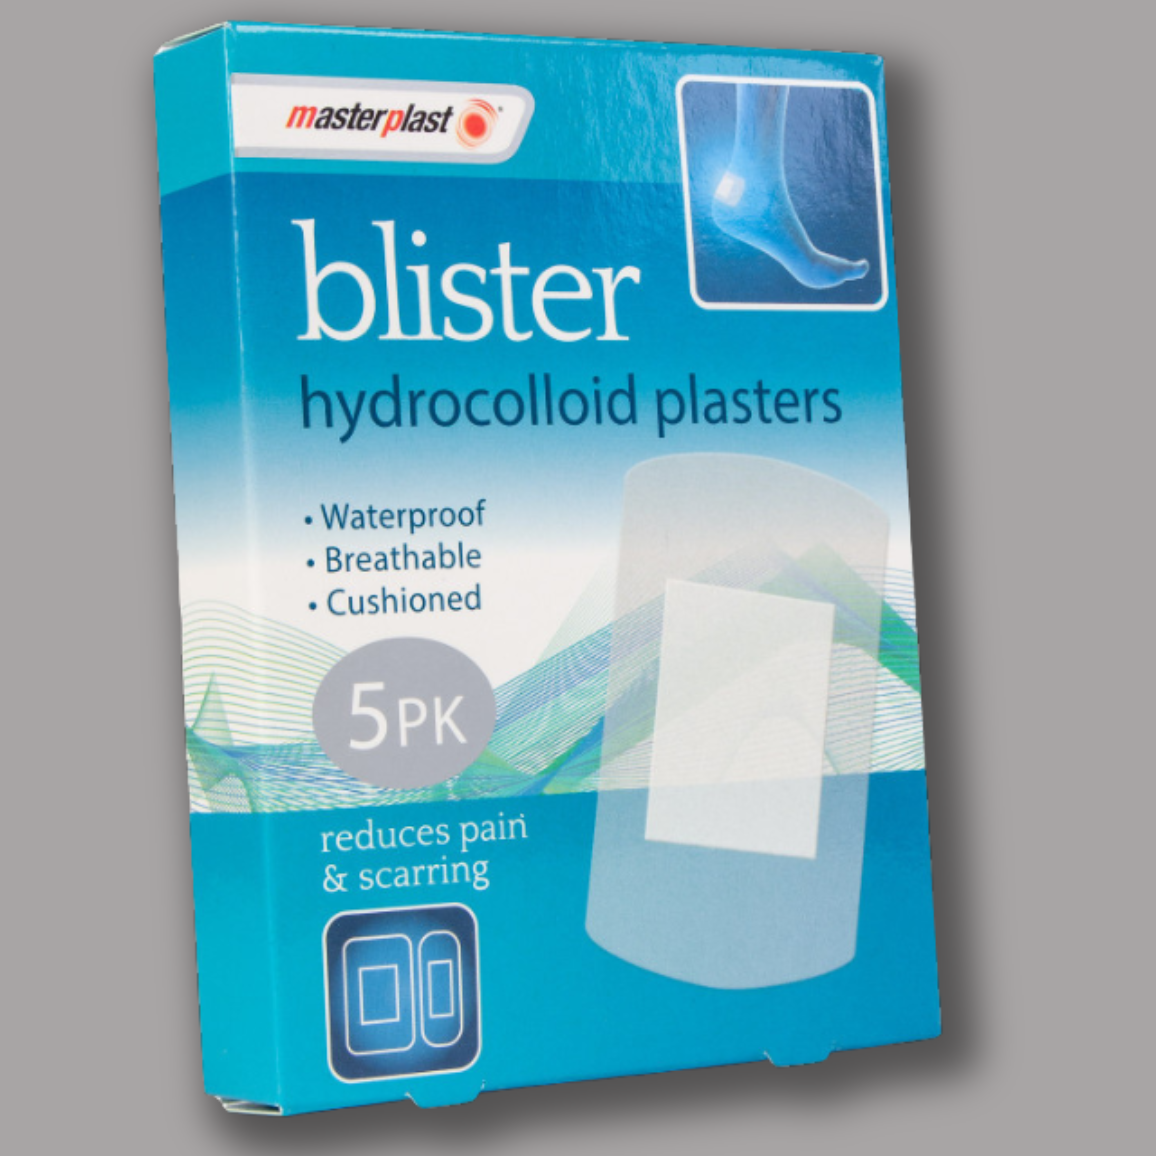 Pack of 5 Hydrocolloid Blister Plasters by Master Plast